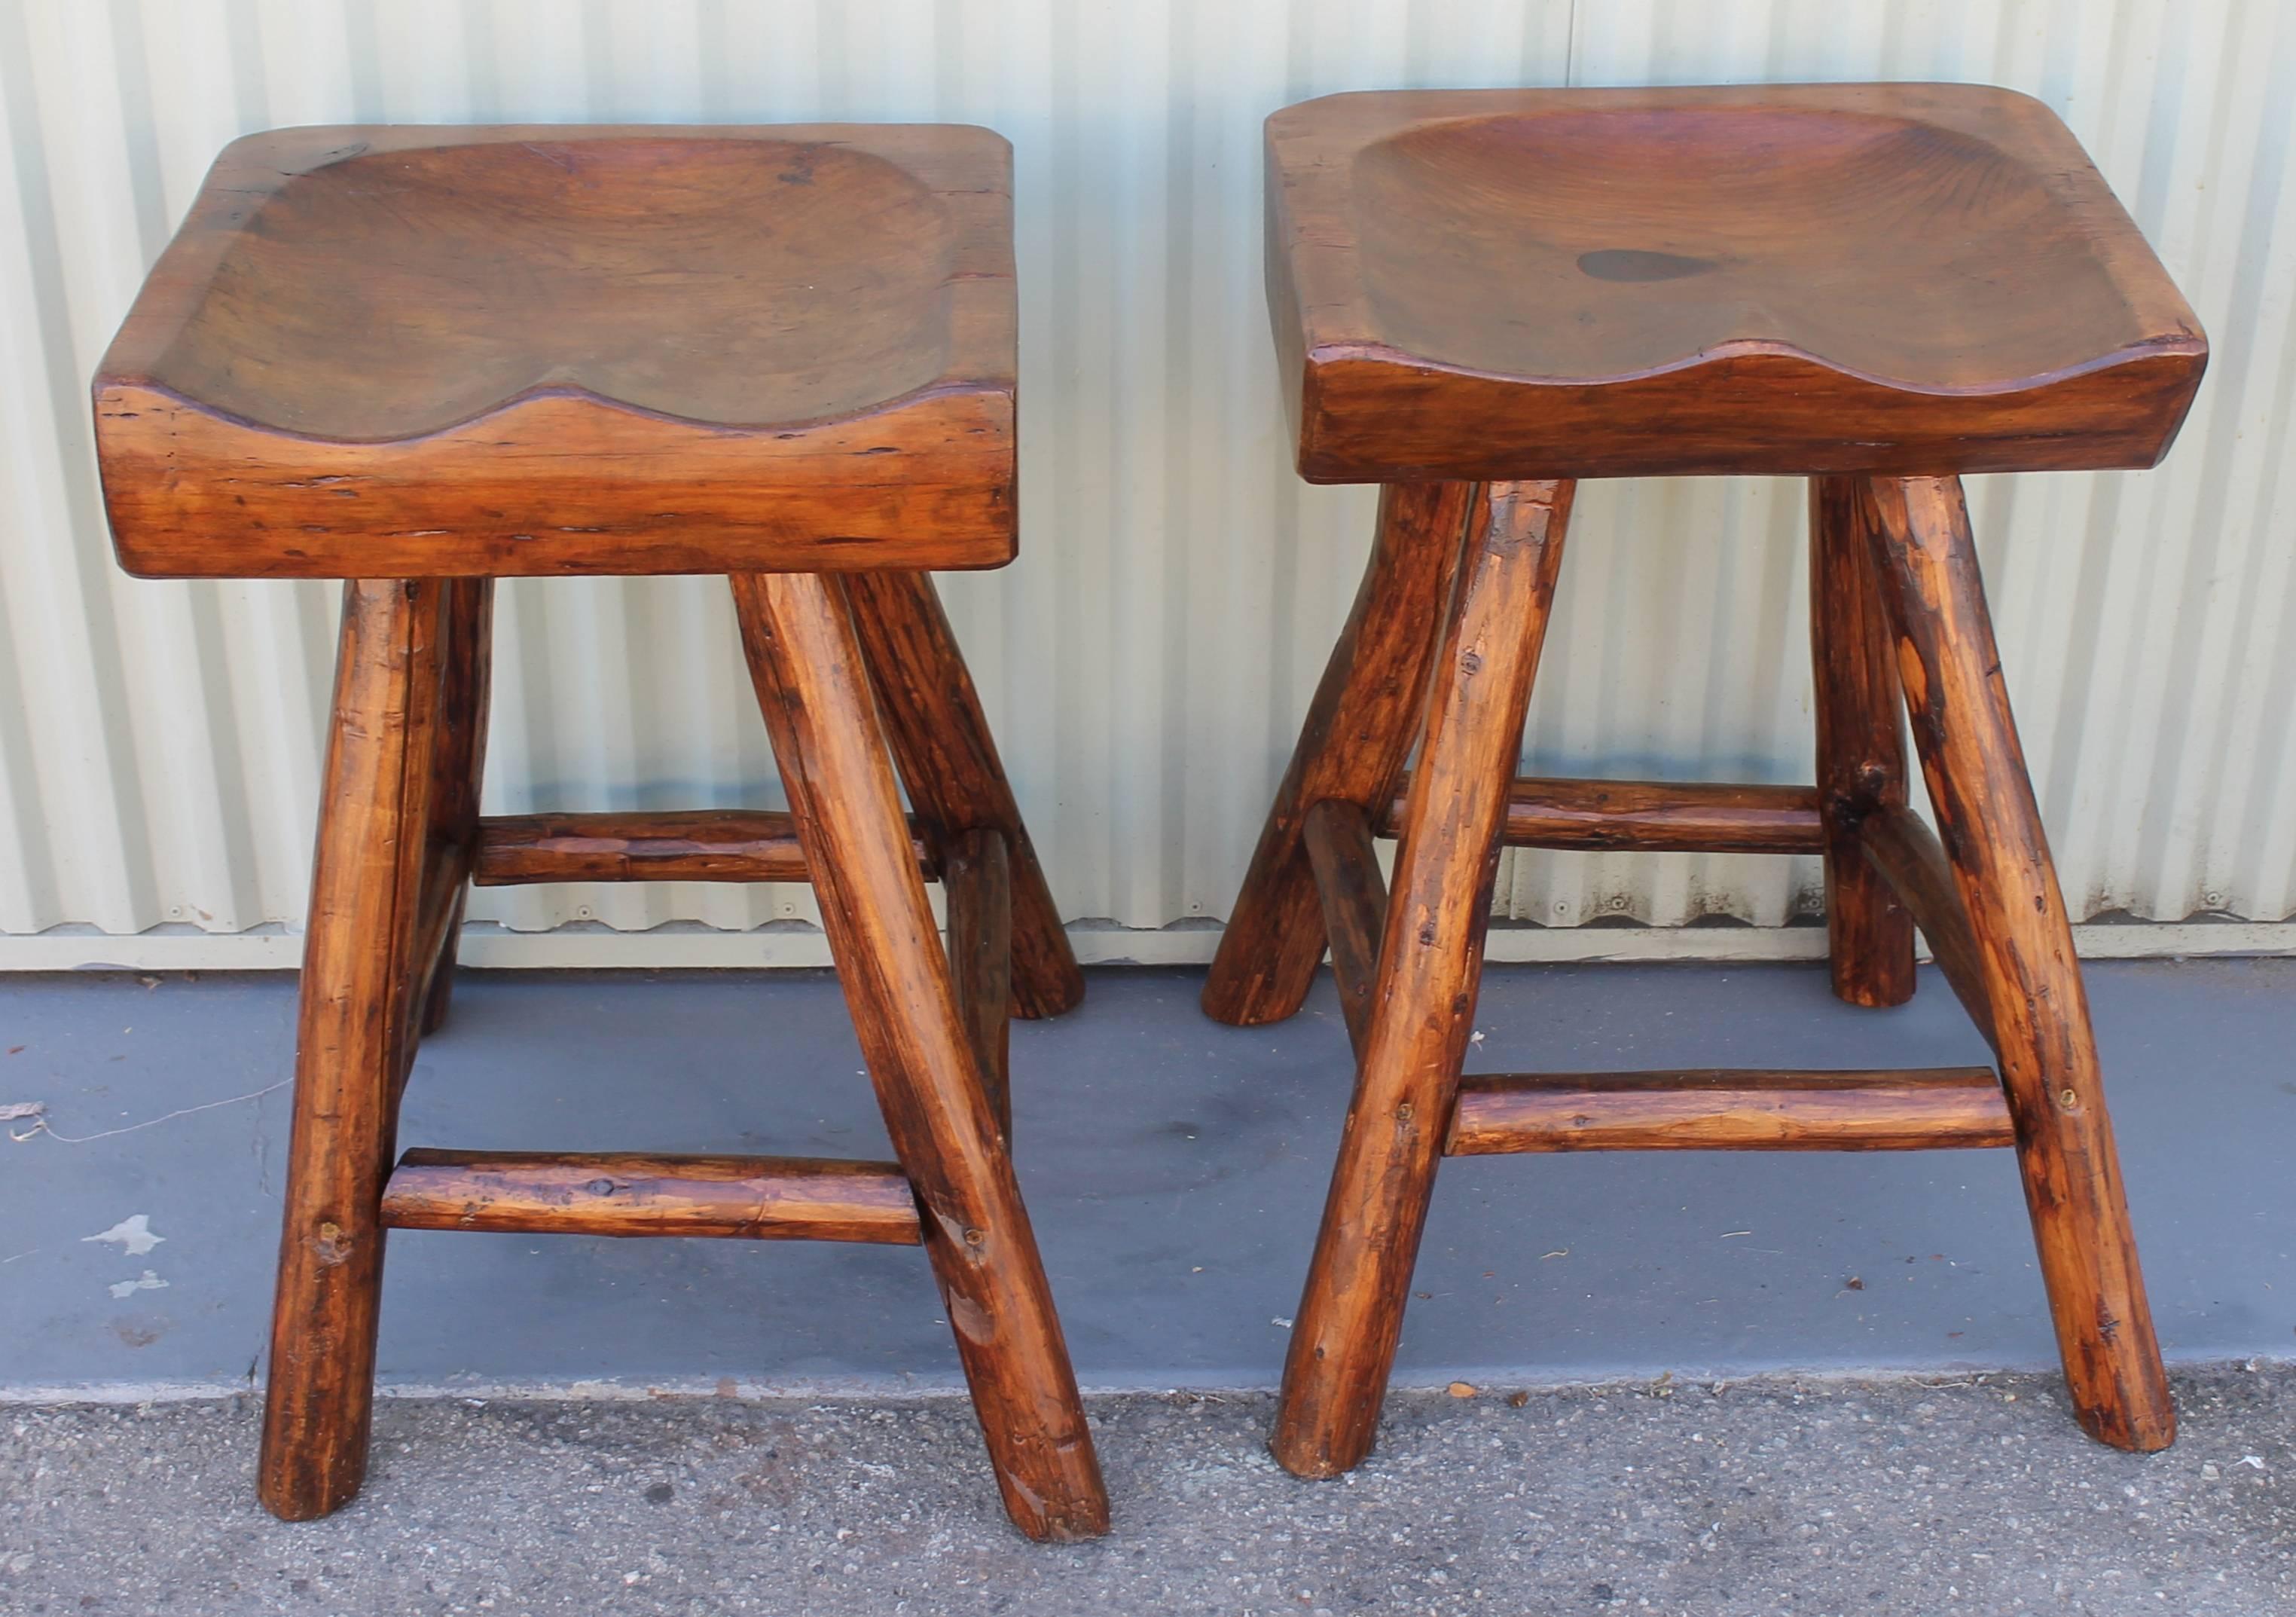 This rustic pair of stools are in amazing condition. The base is made from hickory and the stool has a rustic modern feel. Very clean lines. Condition is very good. Made in Sheboygan, Michigan by Rittenhouse Furniture Company.